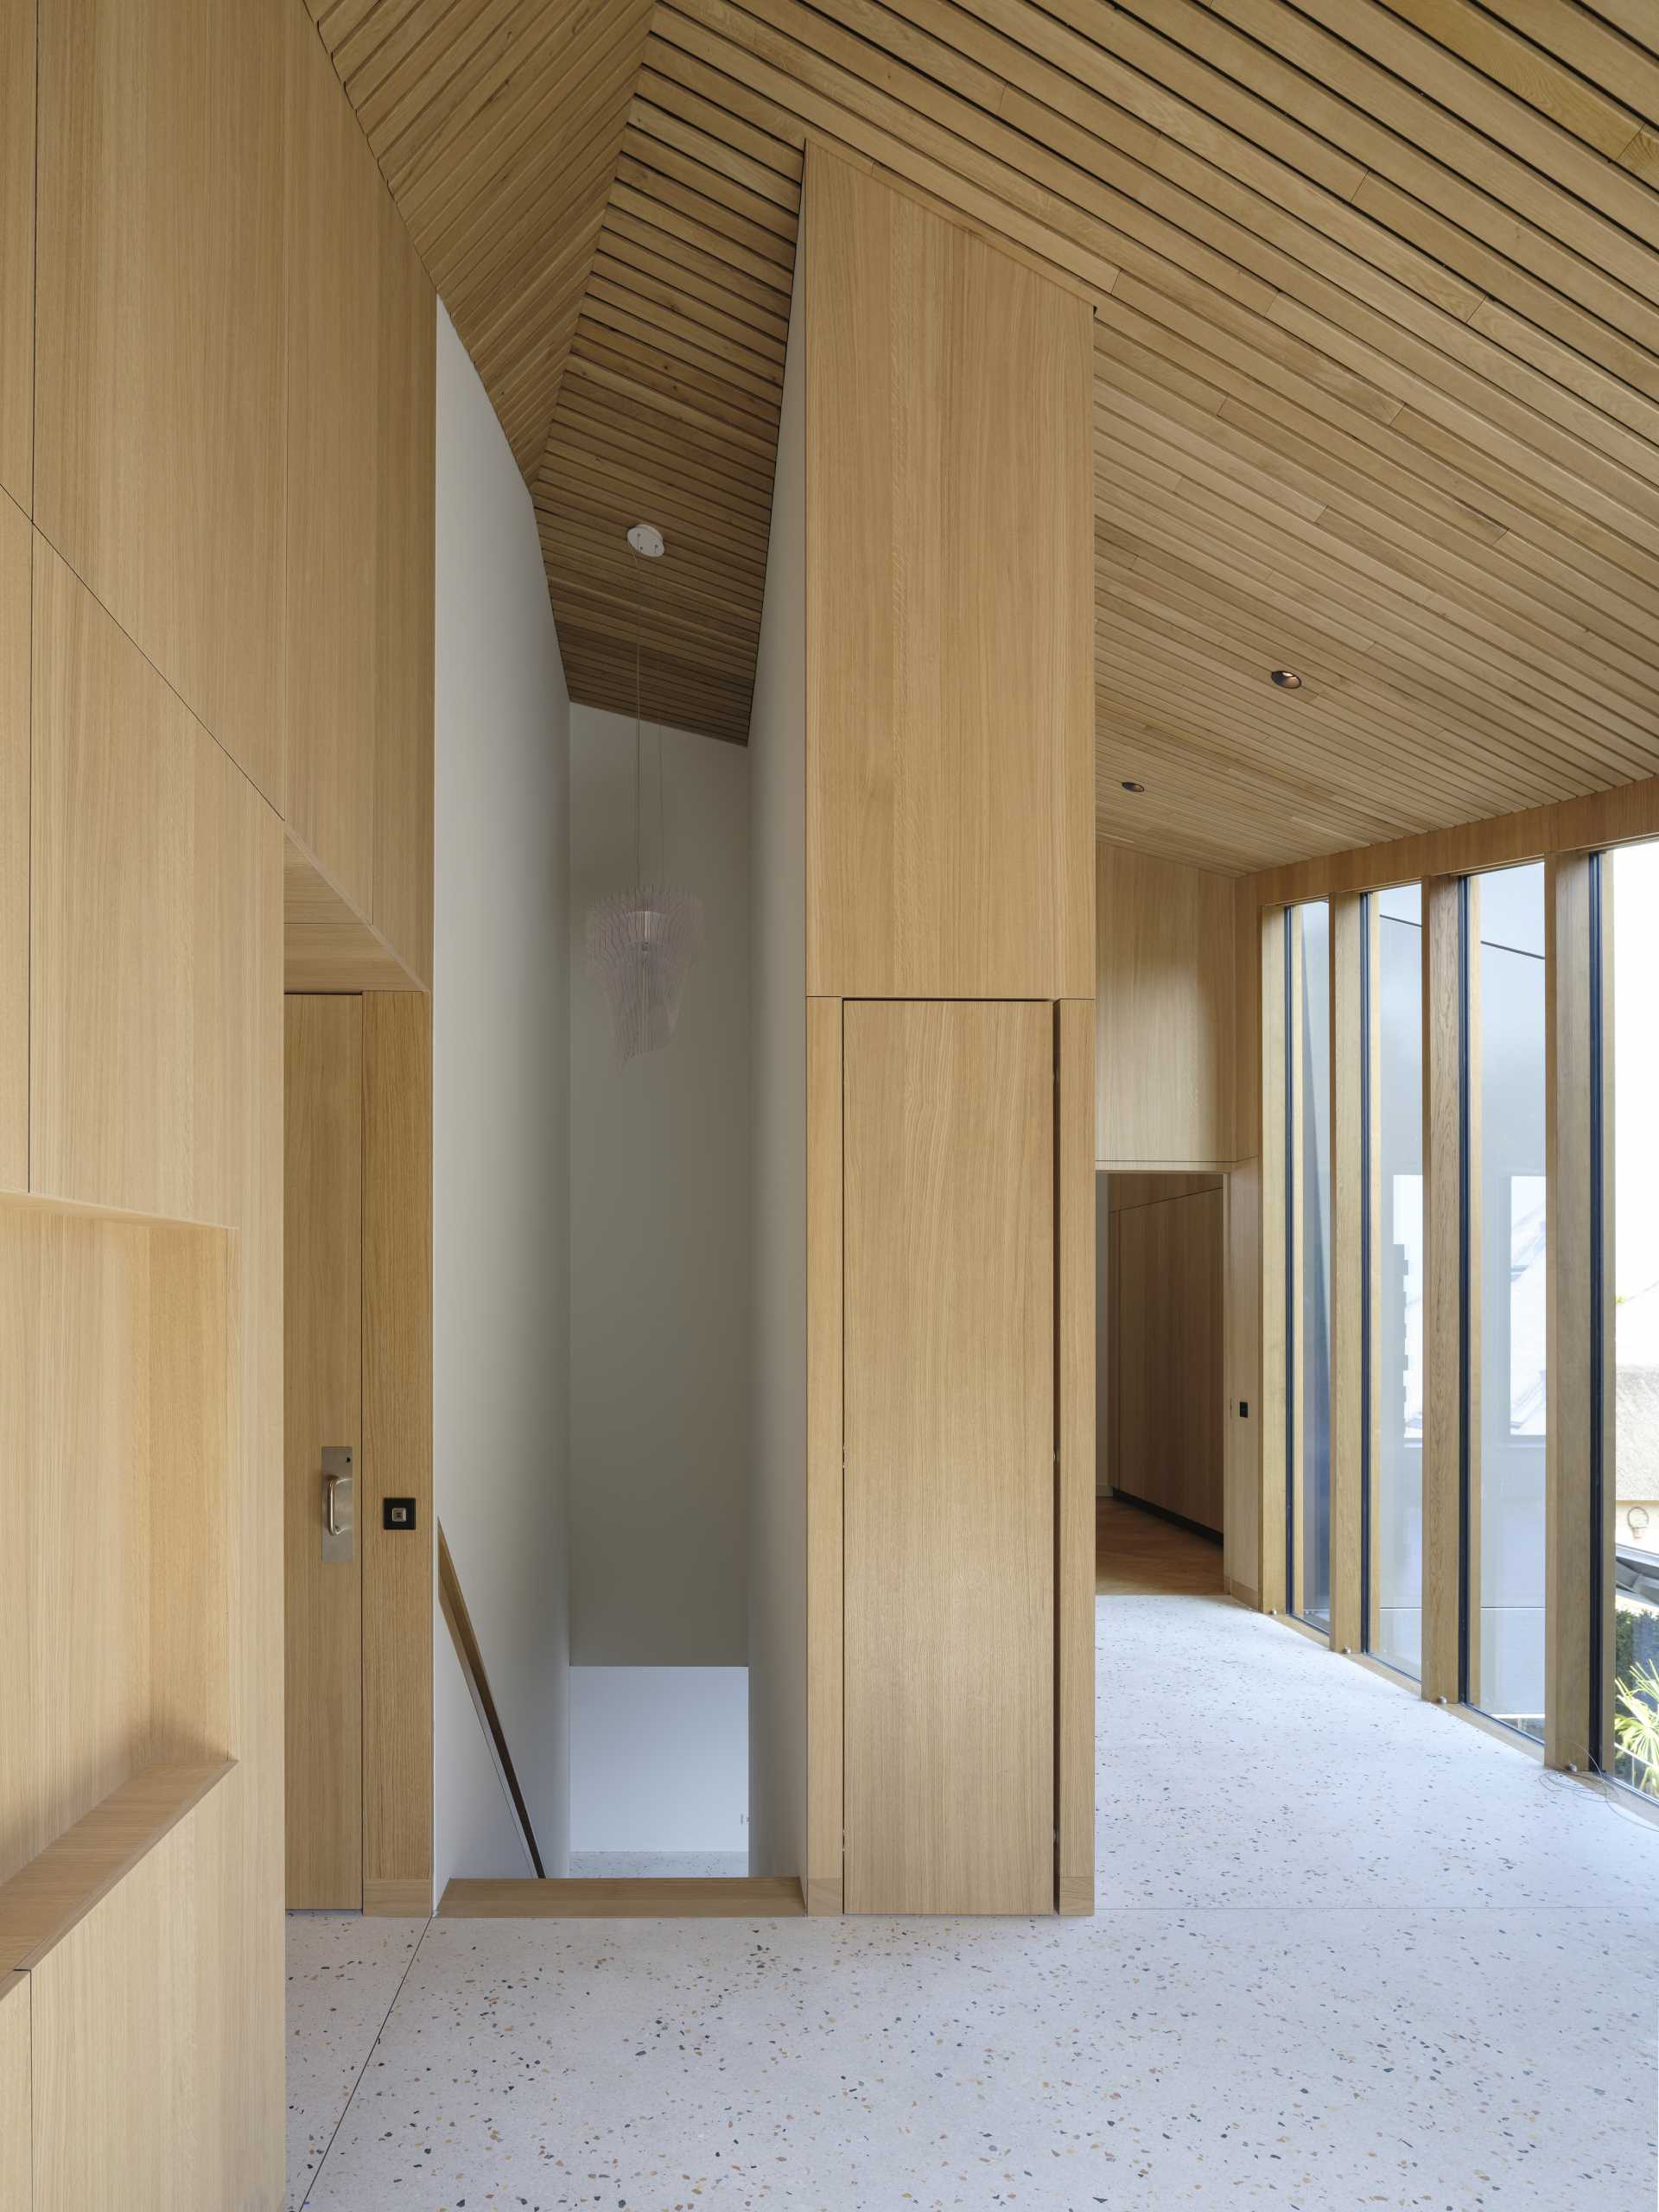 A modern house with a wood-lined interior.